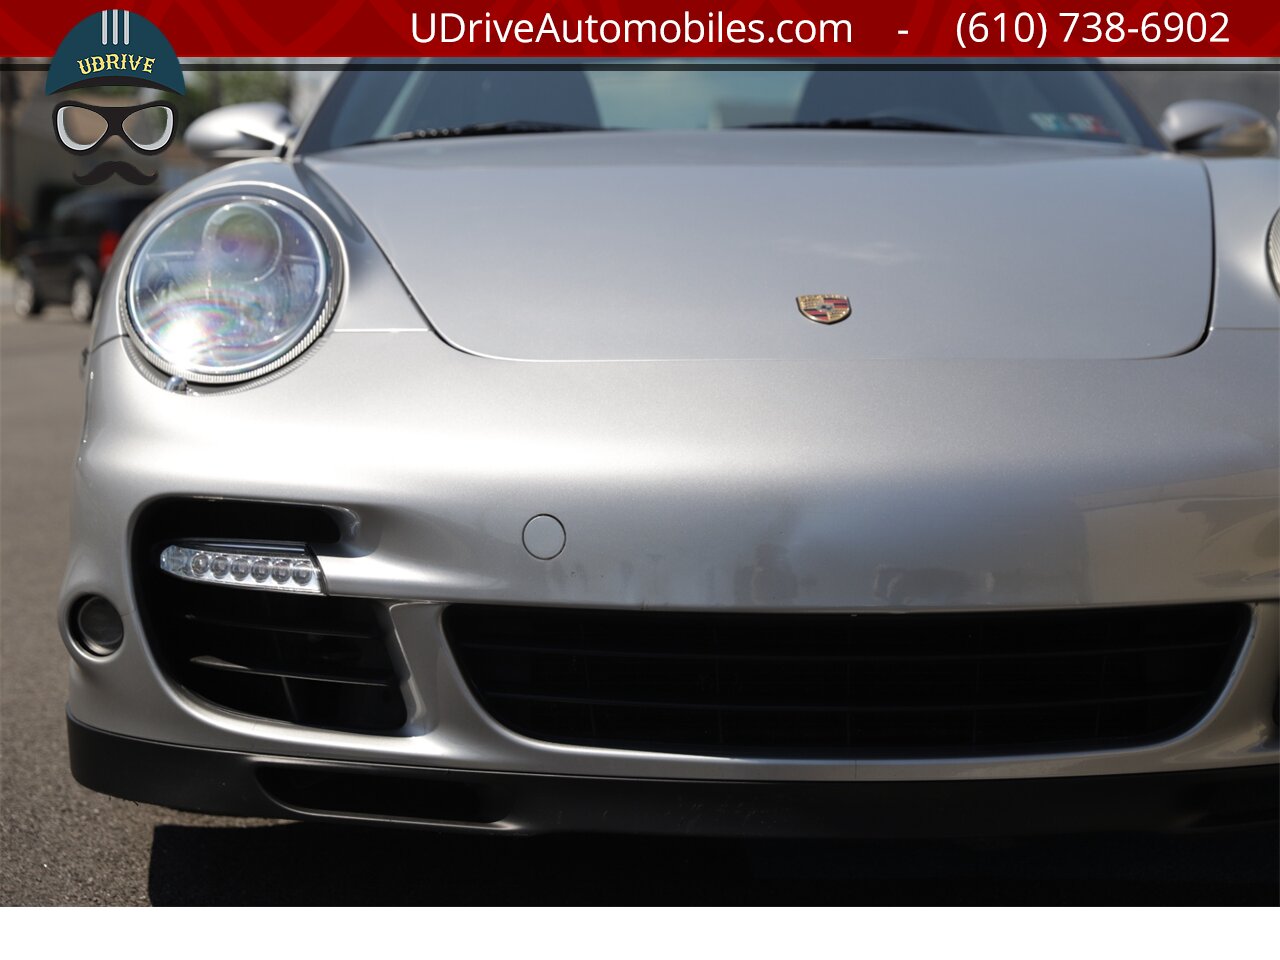 2008 Porsche 911 6 Speed Manual Turbo 997 PCCB's $149k MSRP   - Photo 13 - West Chester, PA 19382